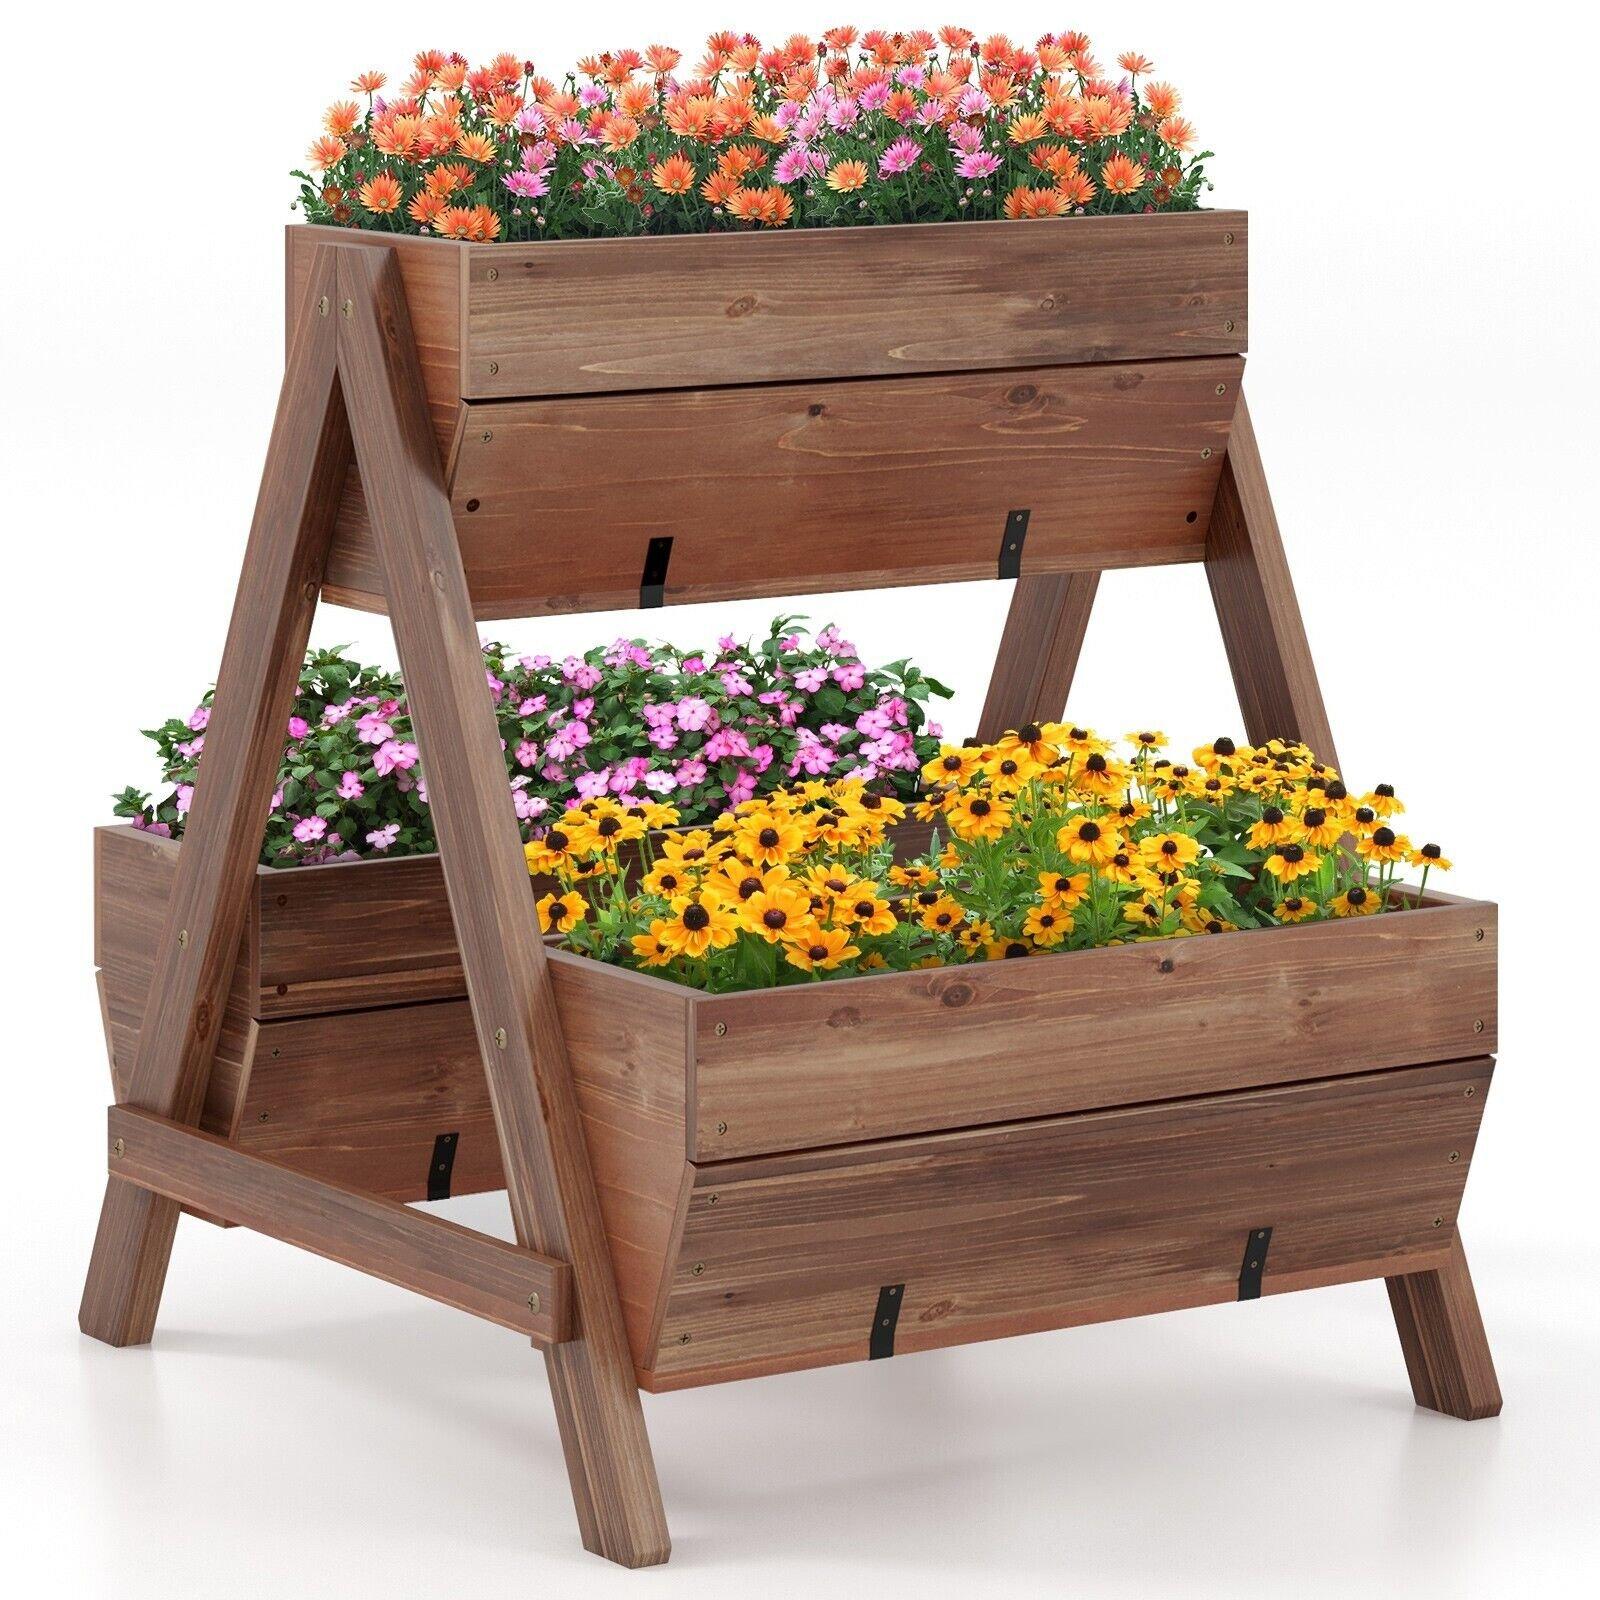 Vertical Raised Garden bed Tiered Elevated Planter Stand w/ 3 Wood Planter Boxes